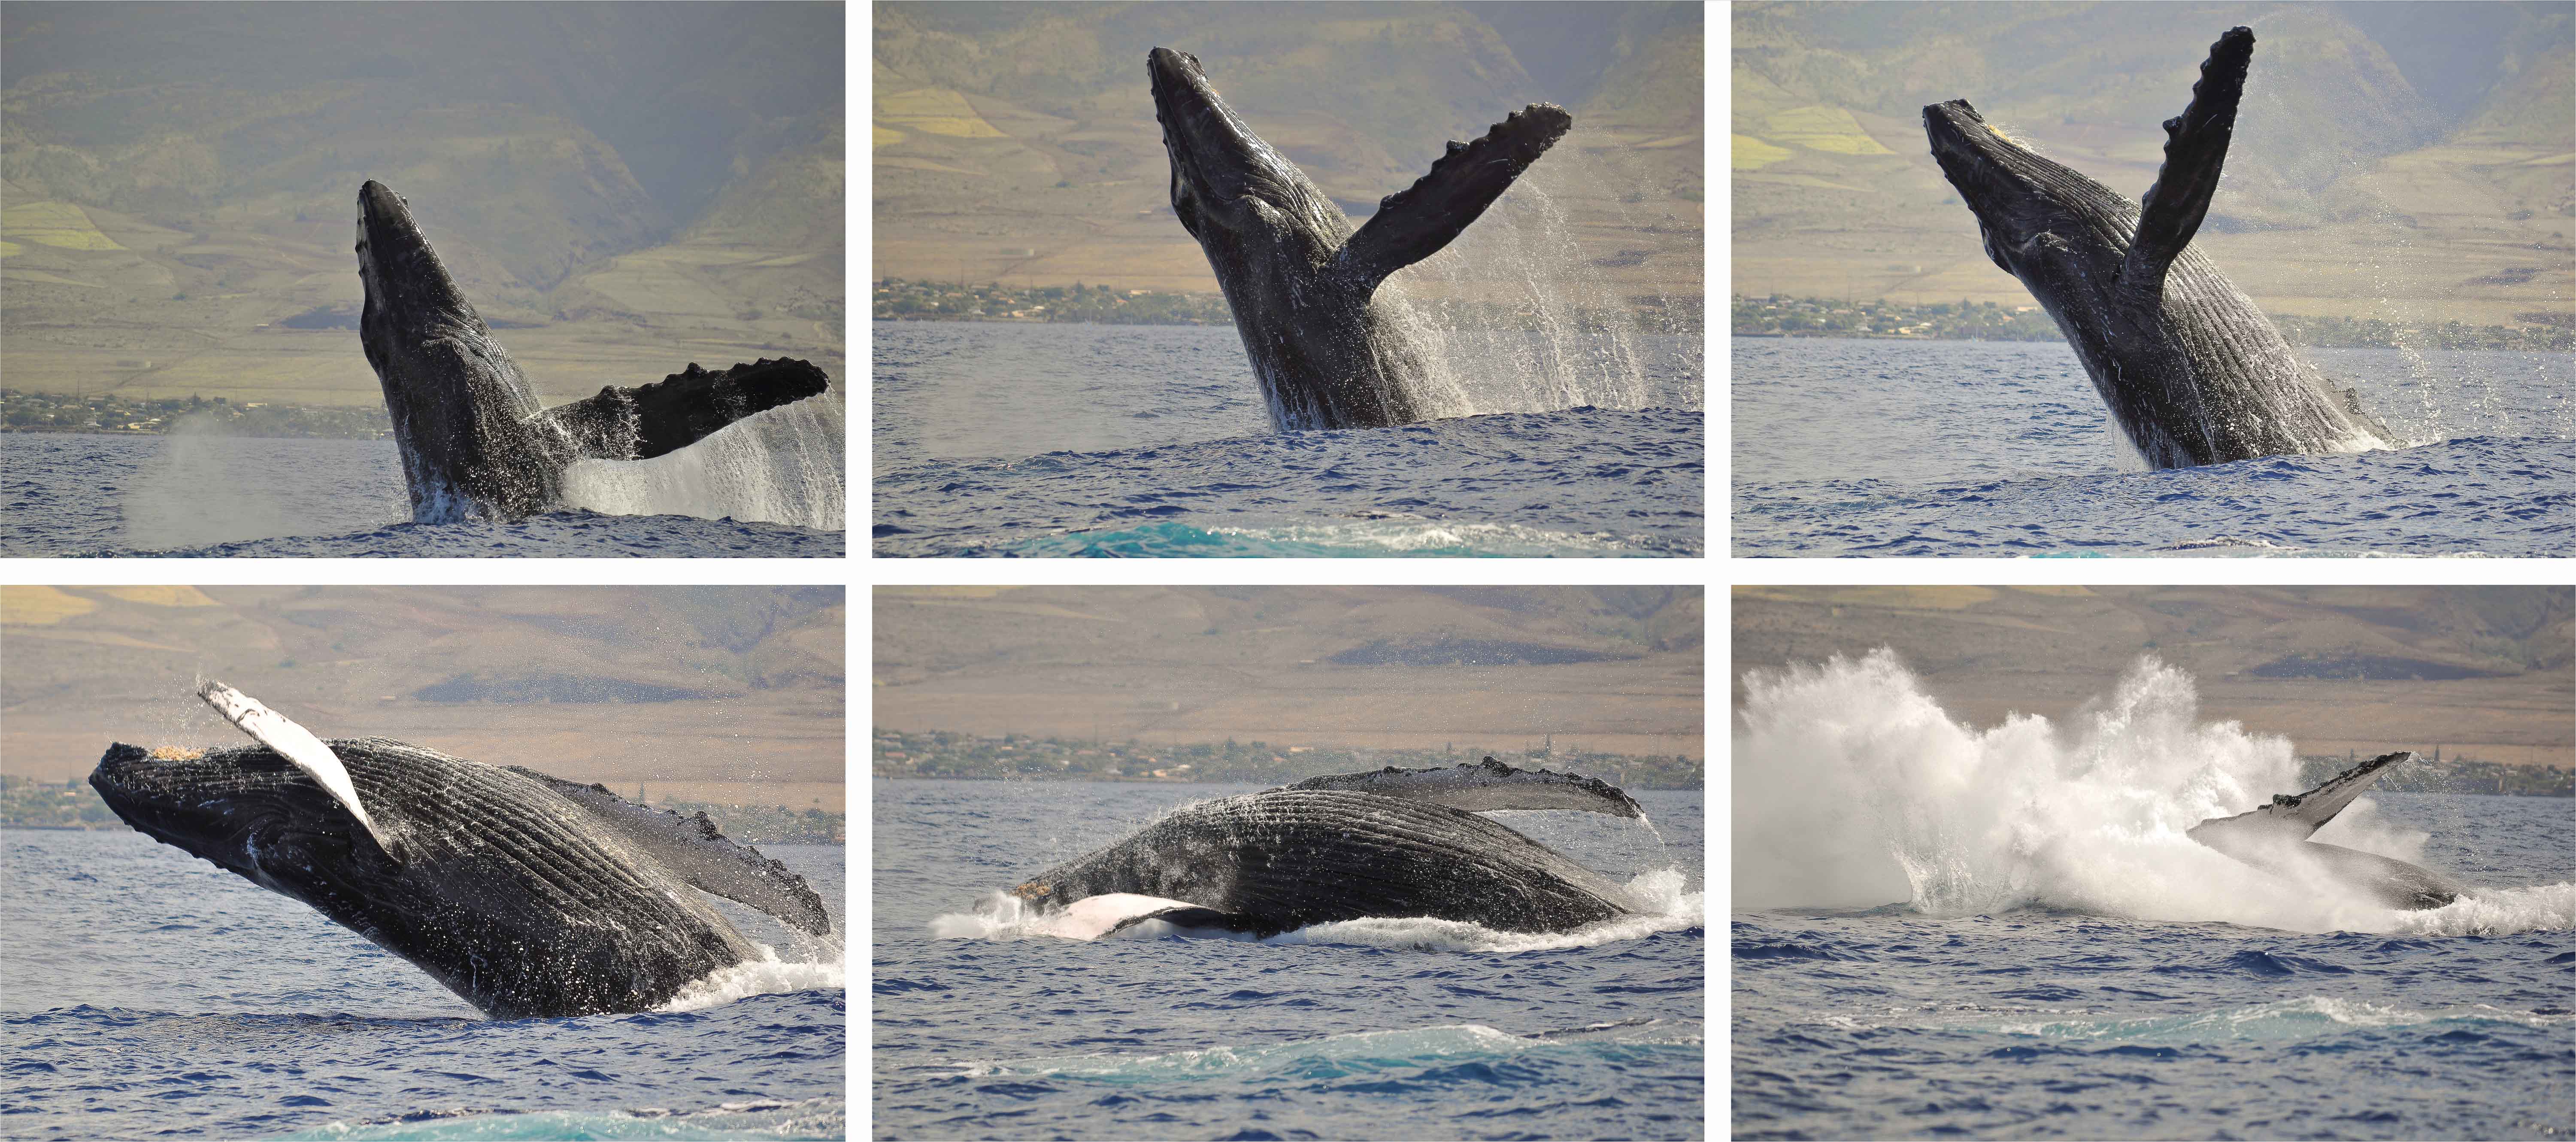 Whale photo sequence